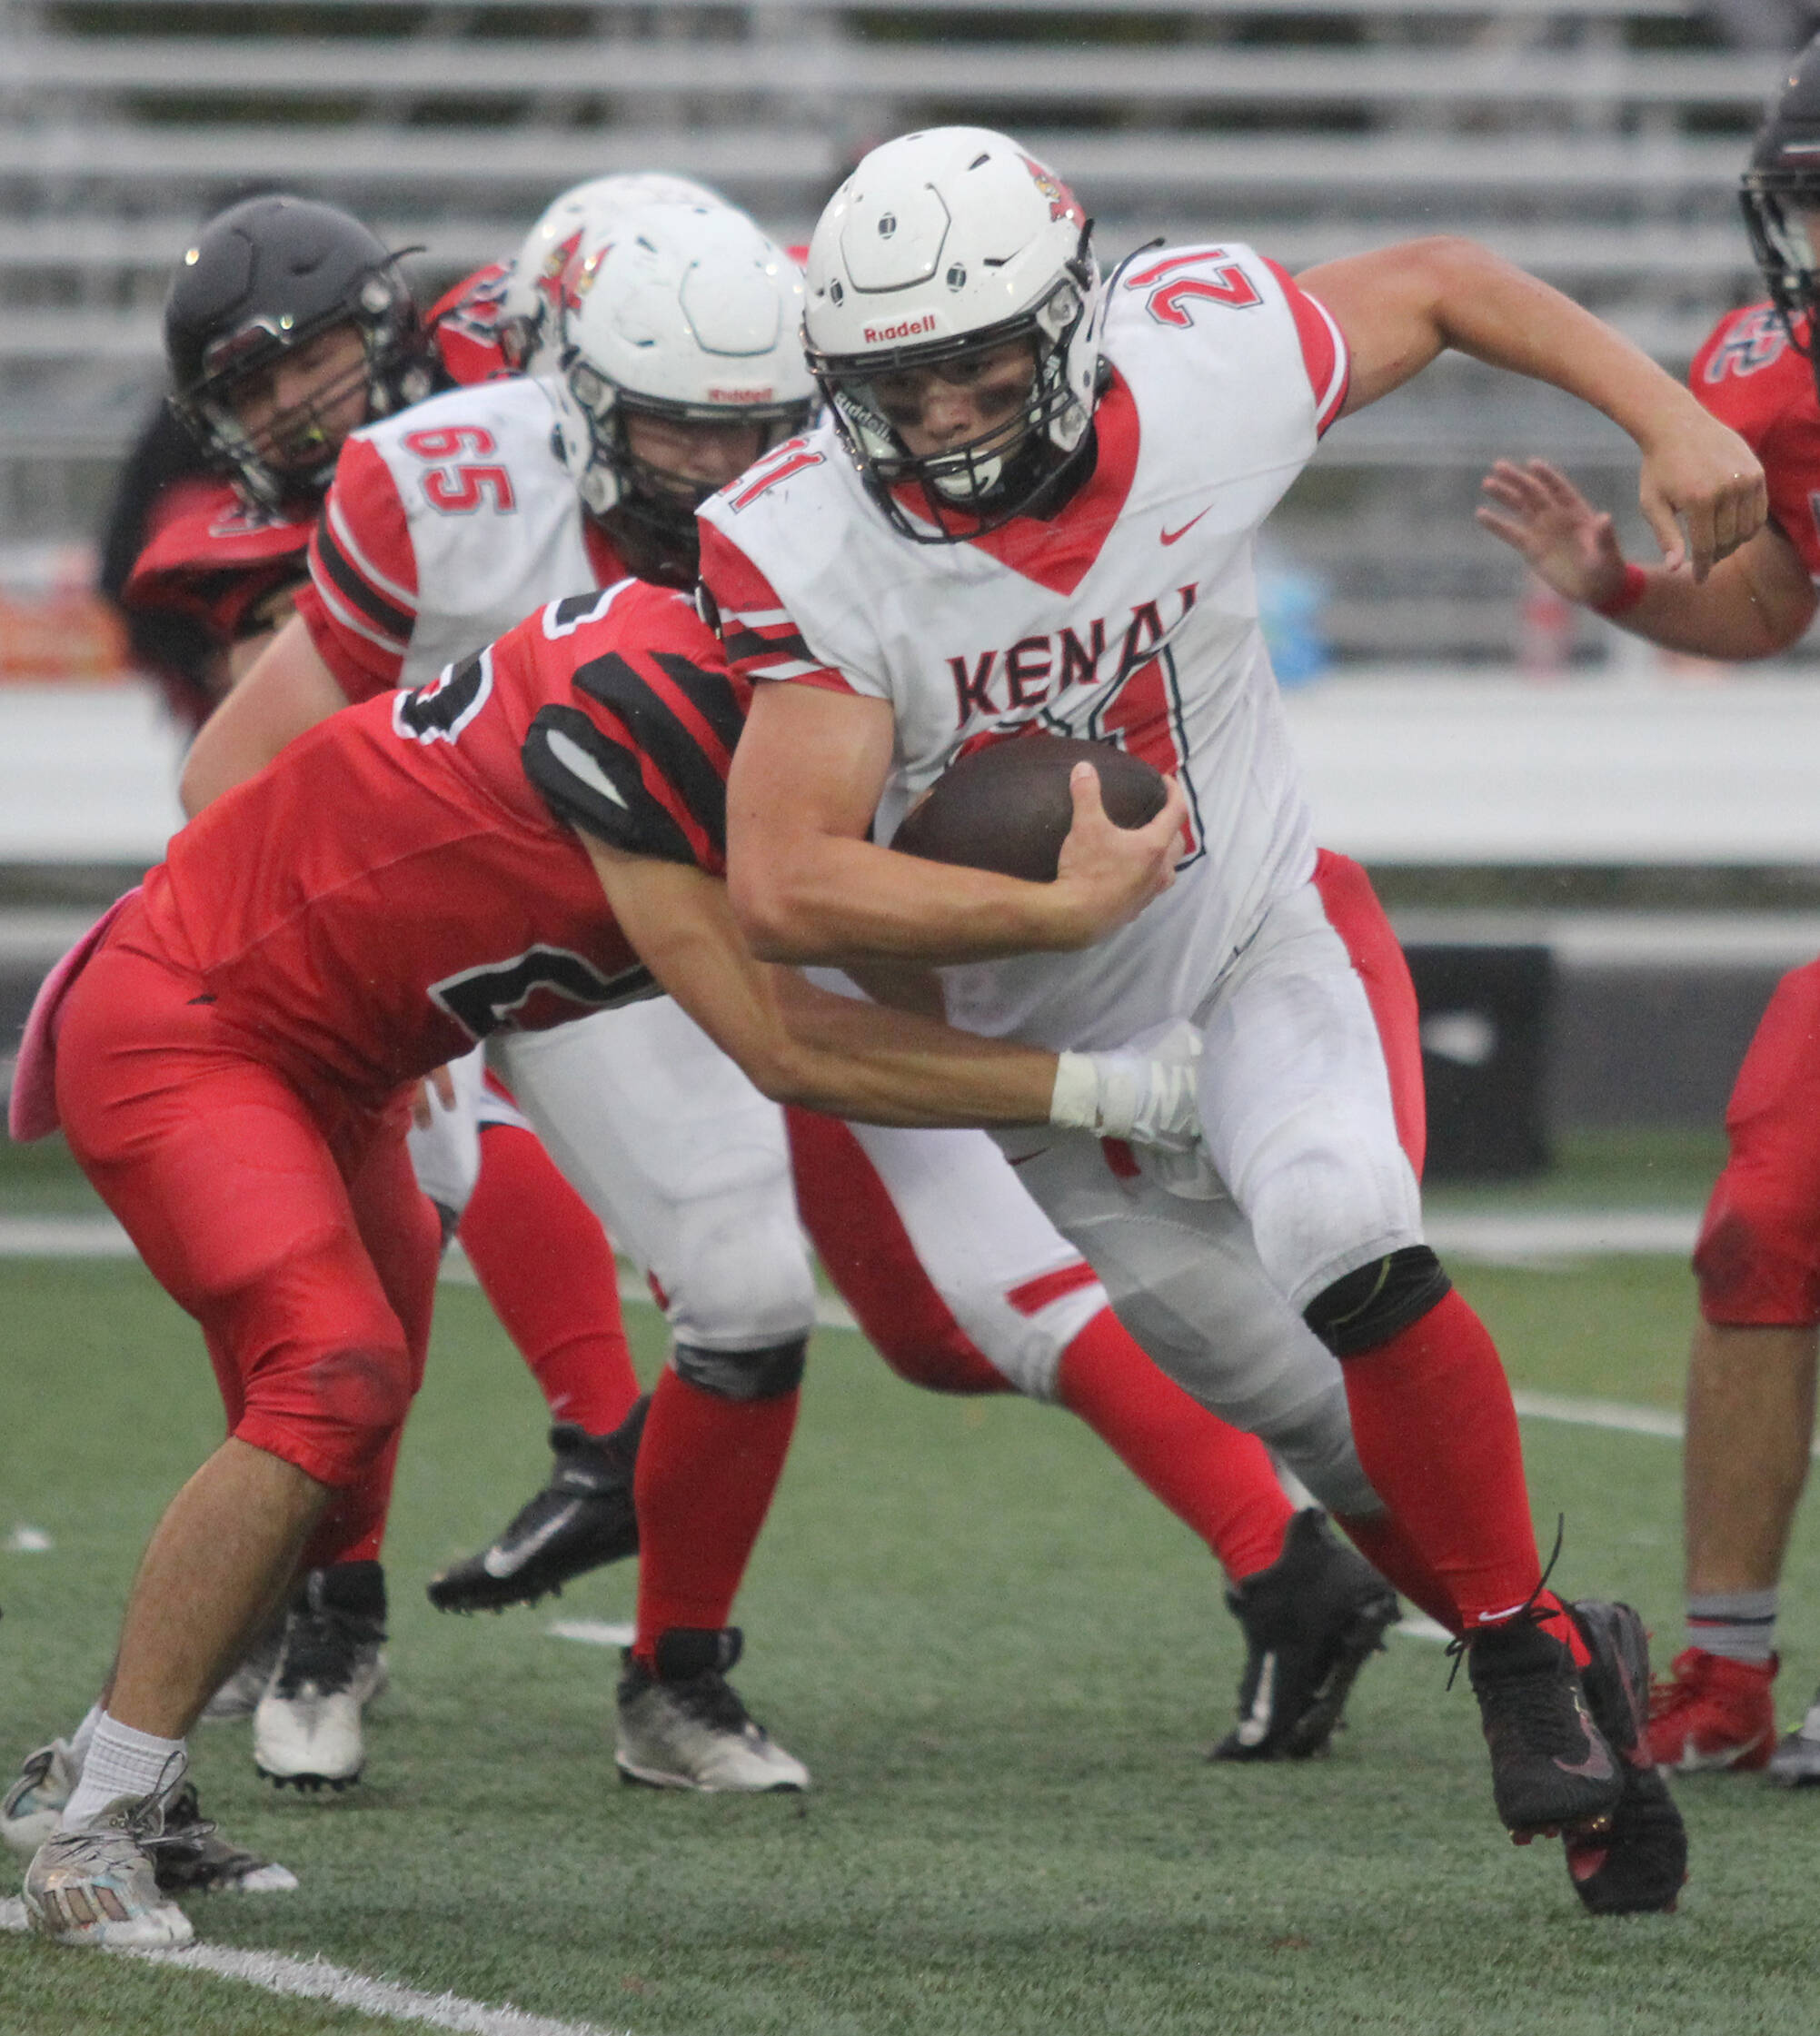 Kena Central running back William Wilson moves for a gain during a 14-13 loss to Houston on Friday, Sept. 8, 2023, in Houston. (Photo by Jeremiah Bartz/Frontiersman)